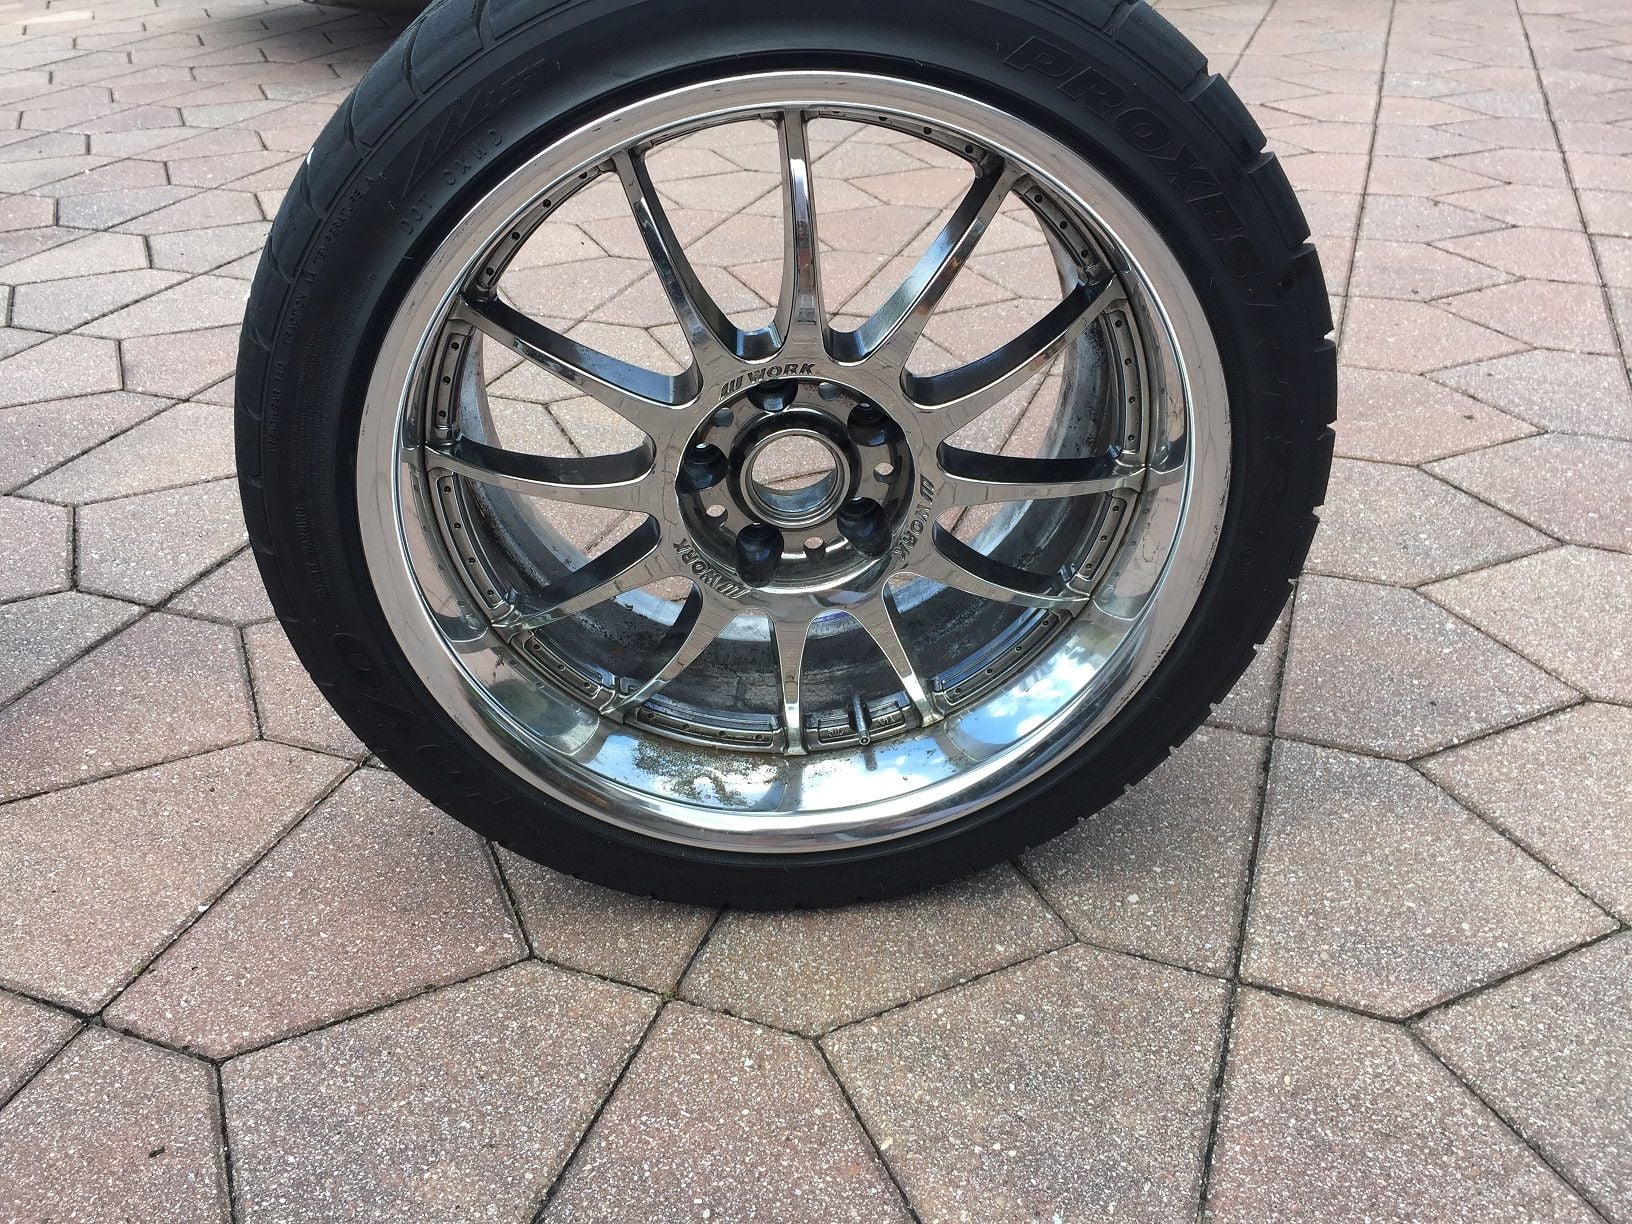 Wheels and Tires/Axles - WORK XSA 18x10 +18 w/ Toyo R1R 265/35/18 tires - Used - 2003 to 2015 Mitsubishi Lancer Evolution - Inverness, FL 34453, United States